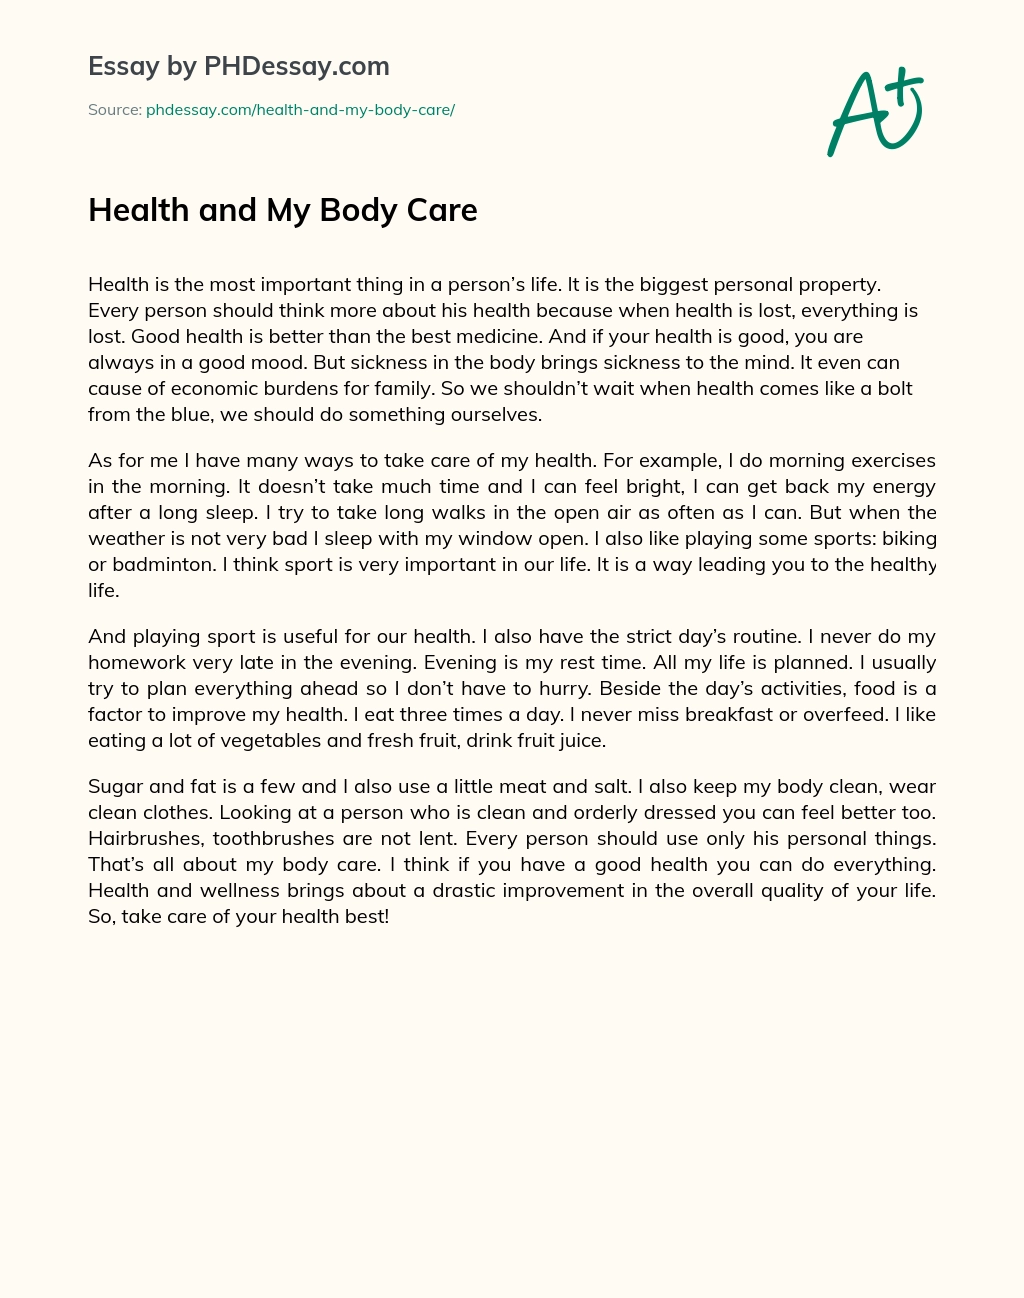 Health and My Body Care essay